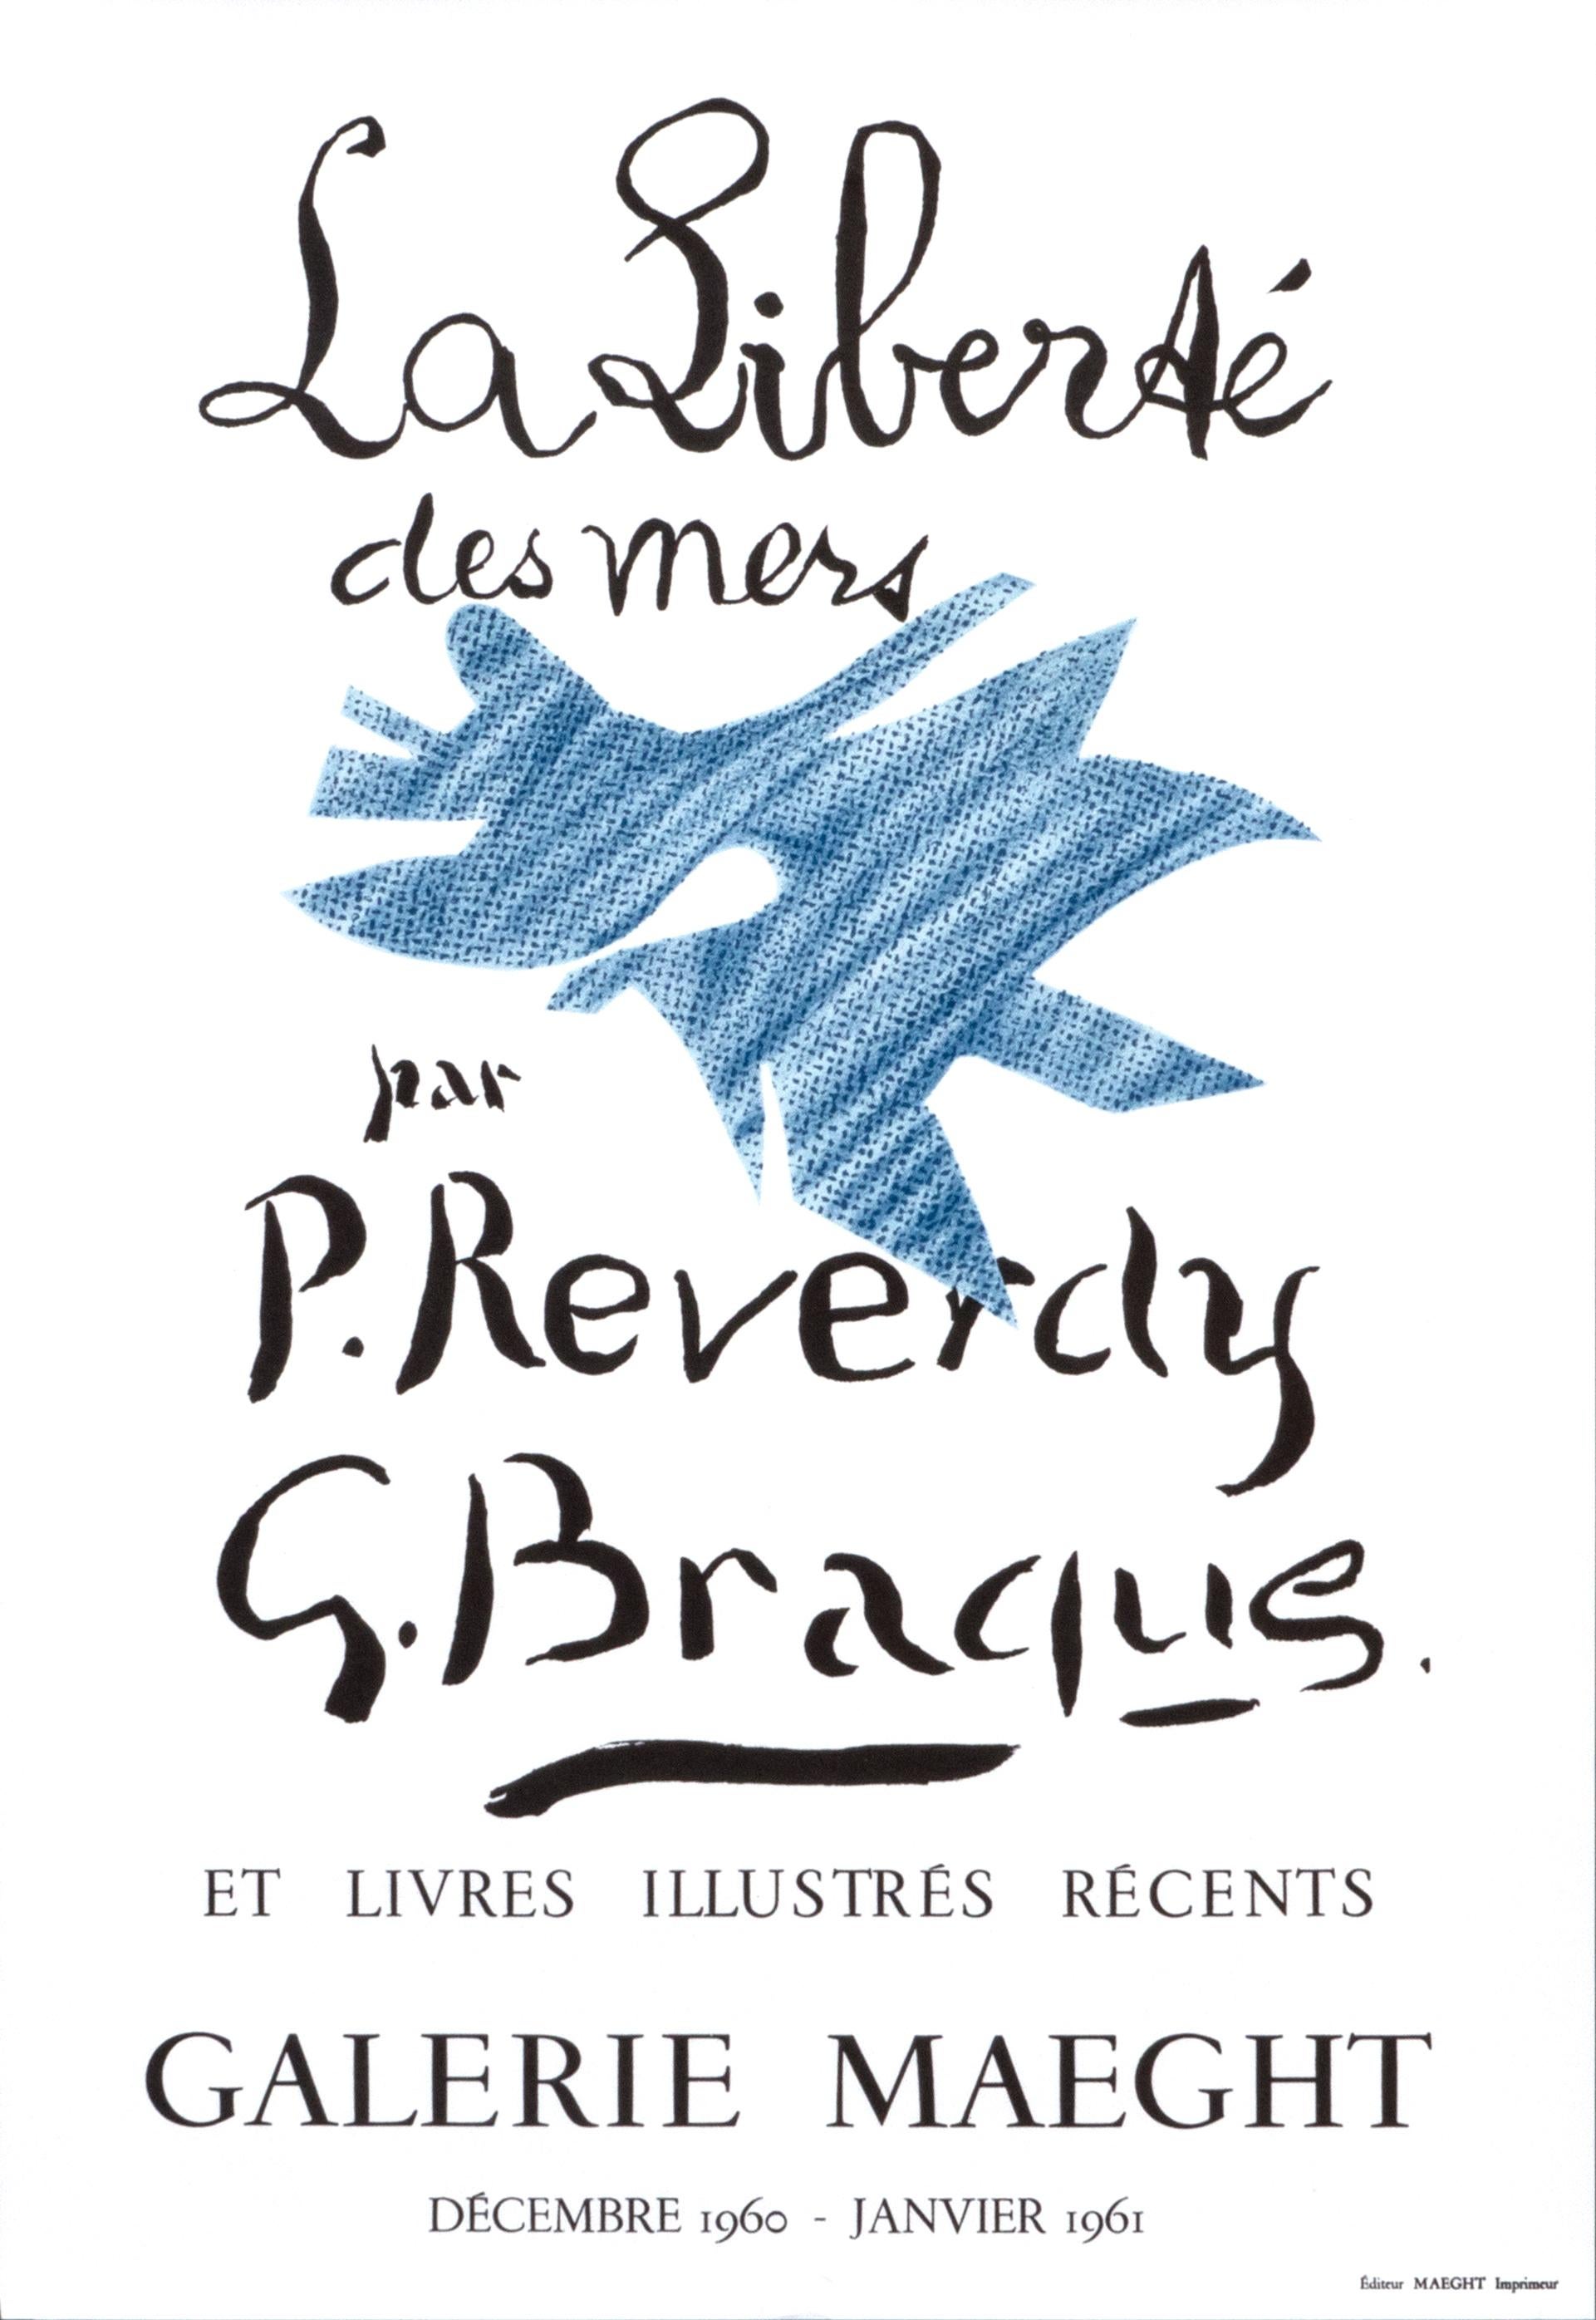 "La Liberte des mers" Braque Vintage French Exhibition Poster - Galerie Maeght - Print by (after) Georges Braque